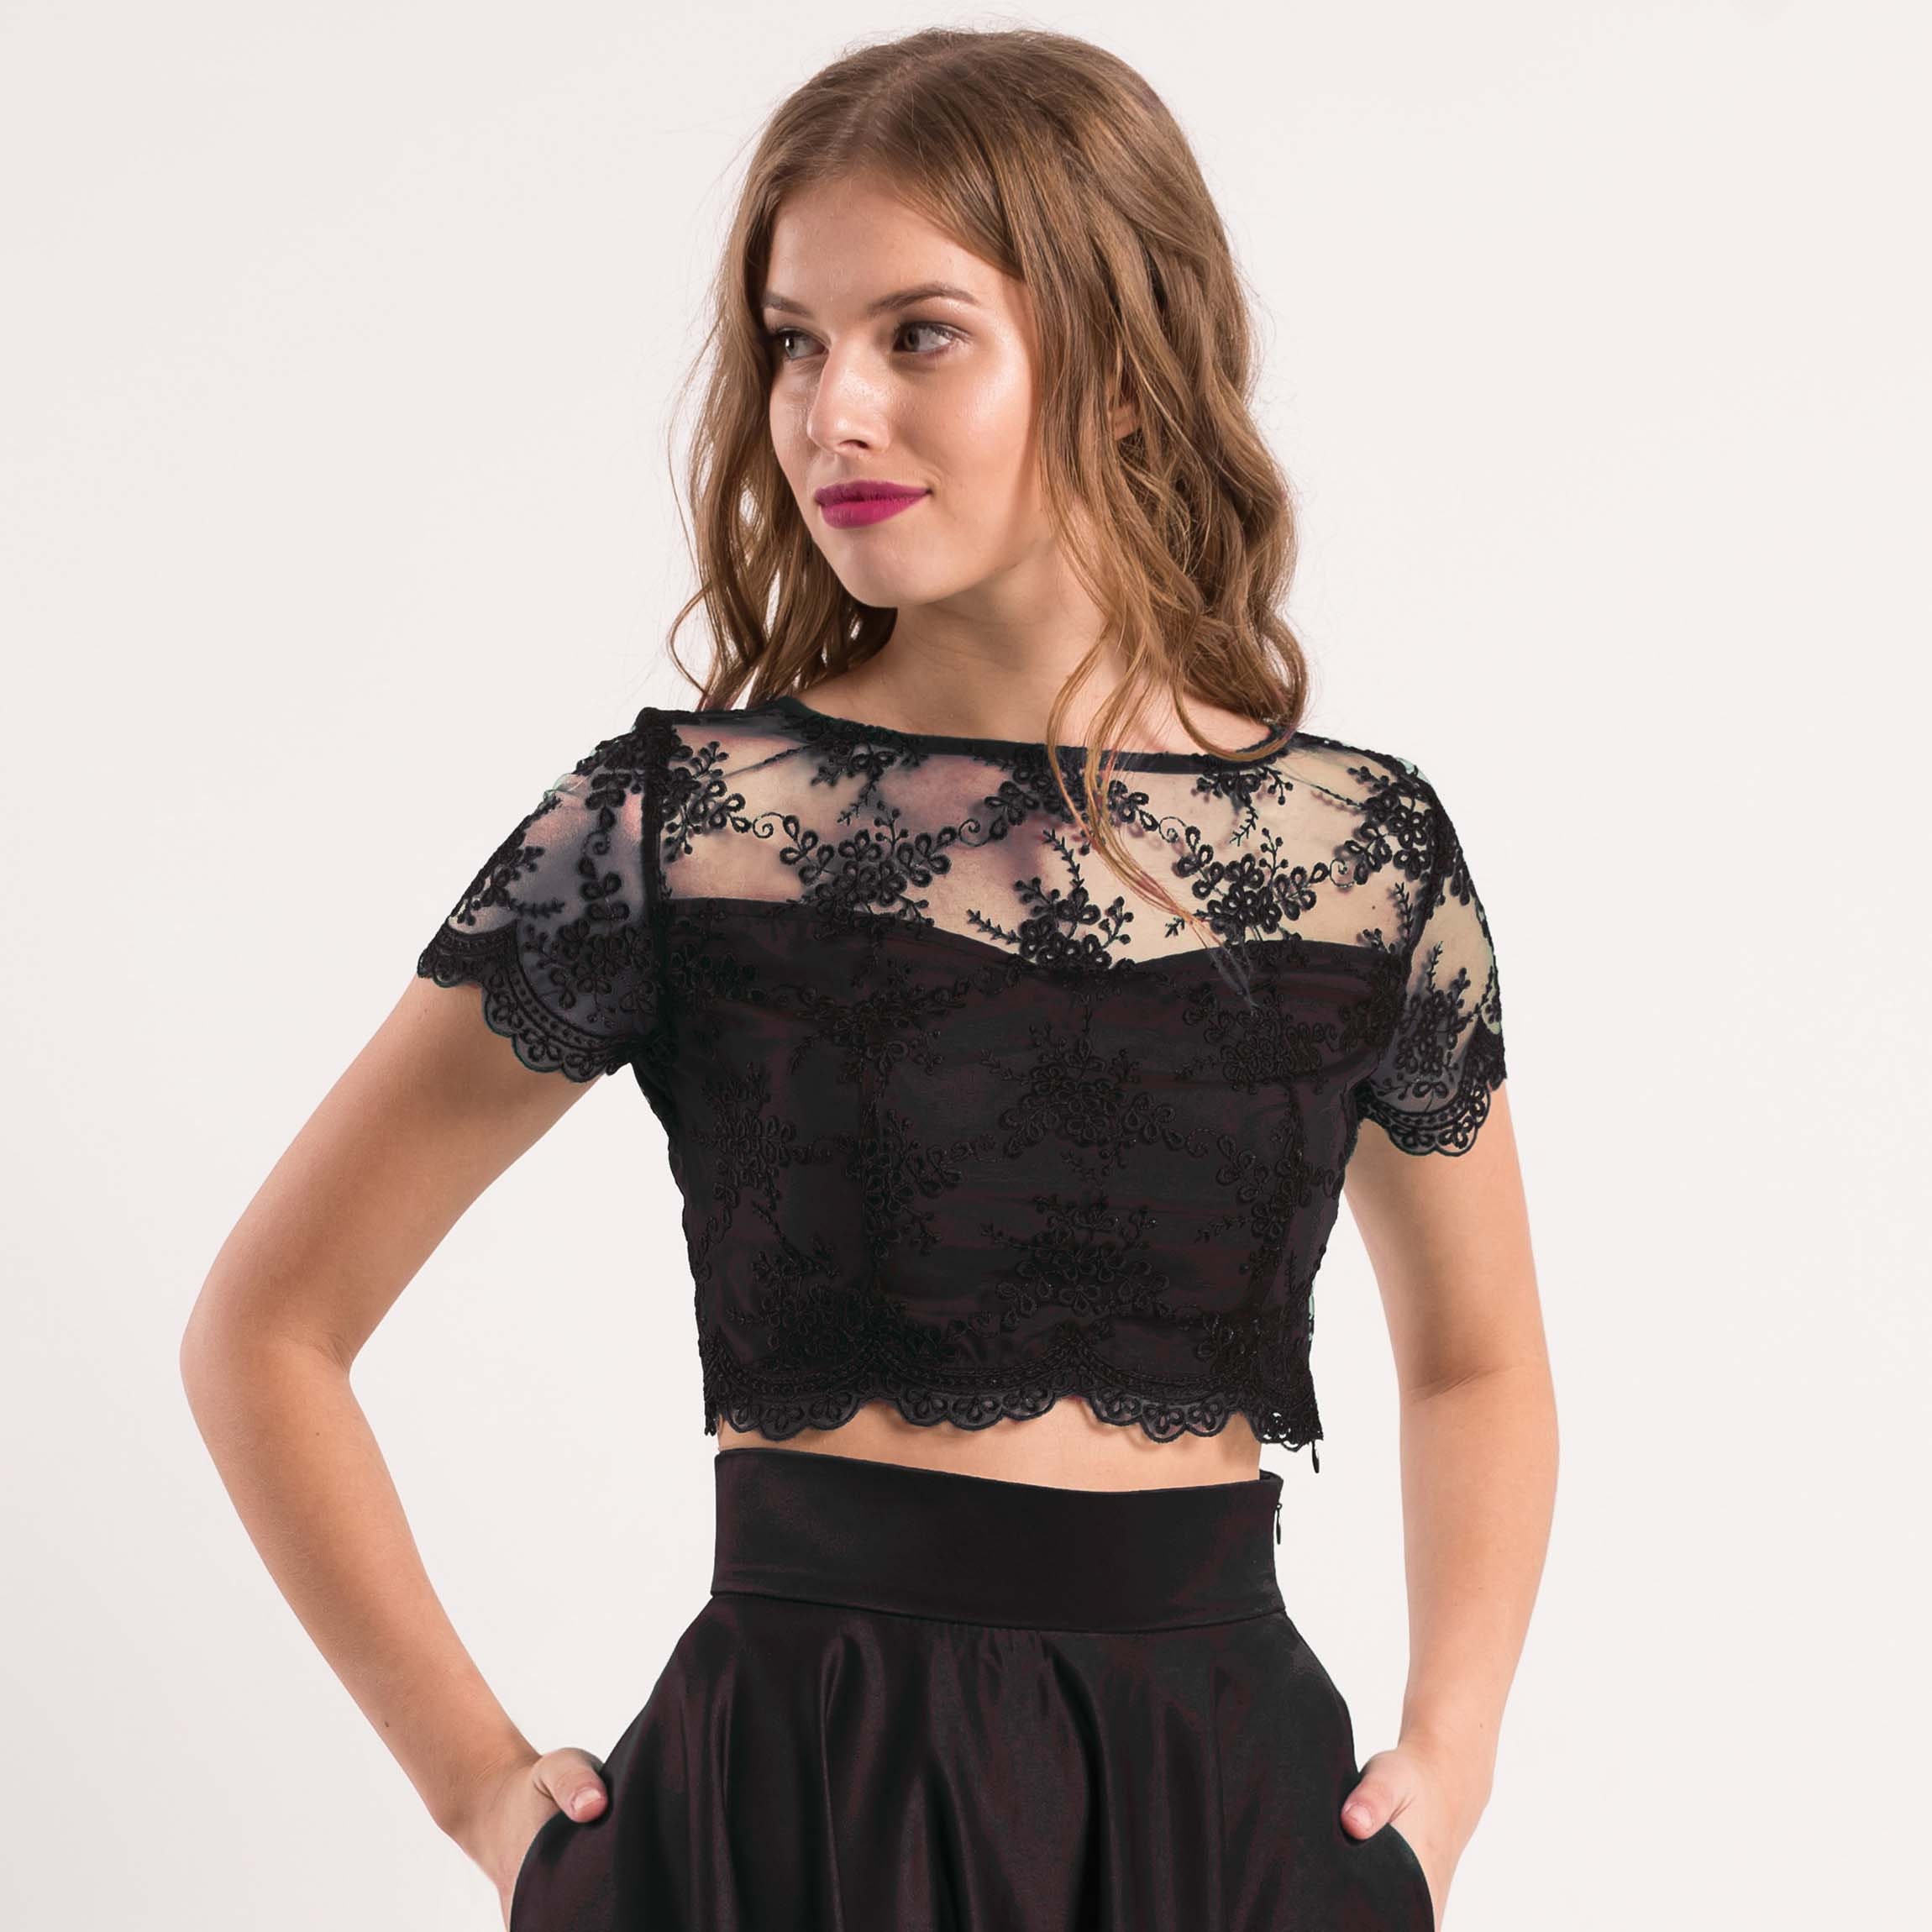 Evening Black Crop Top / Lace Top With Buttons / Crop Top Prom